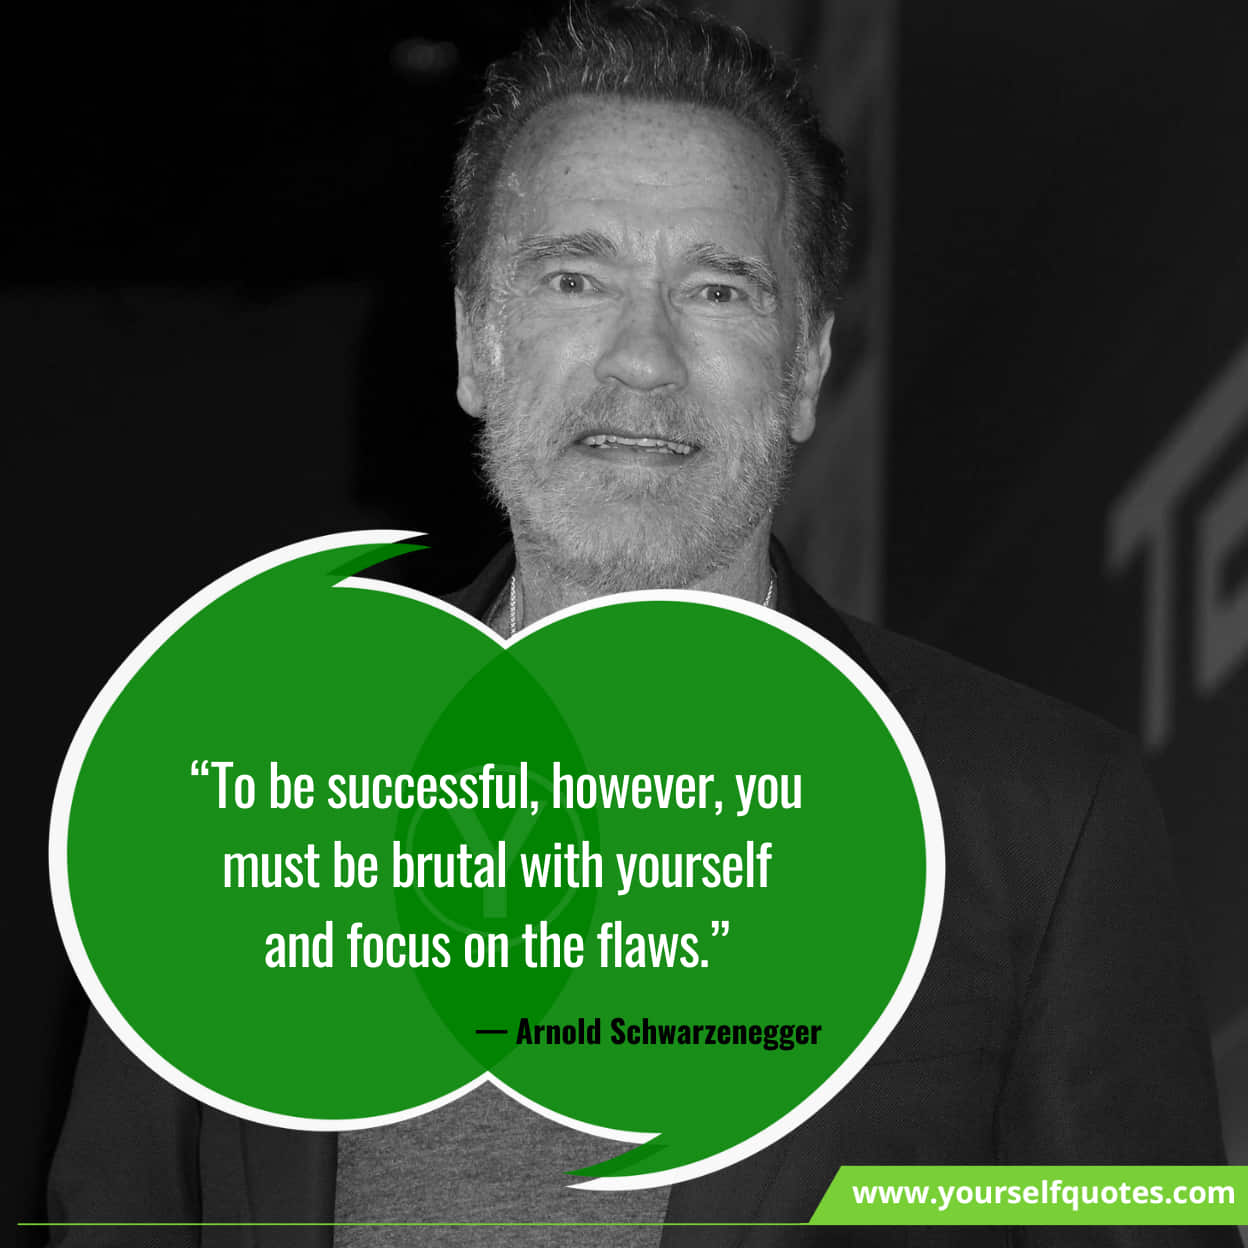 Famous Quotes From Arnold Schwarzenegger